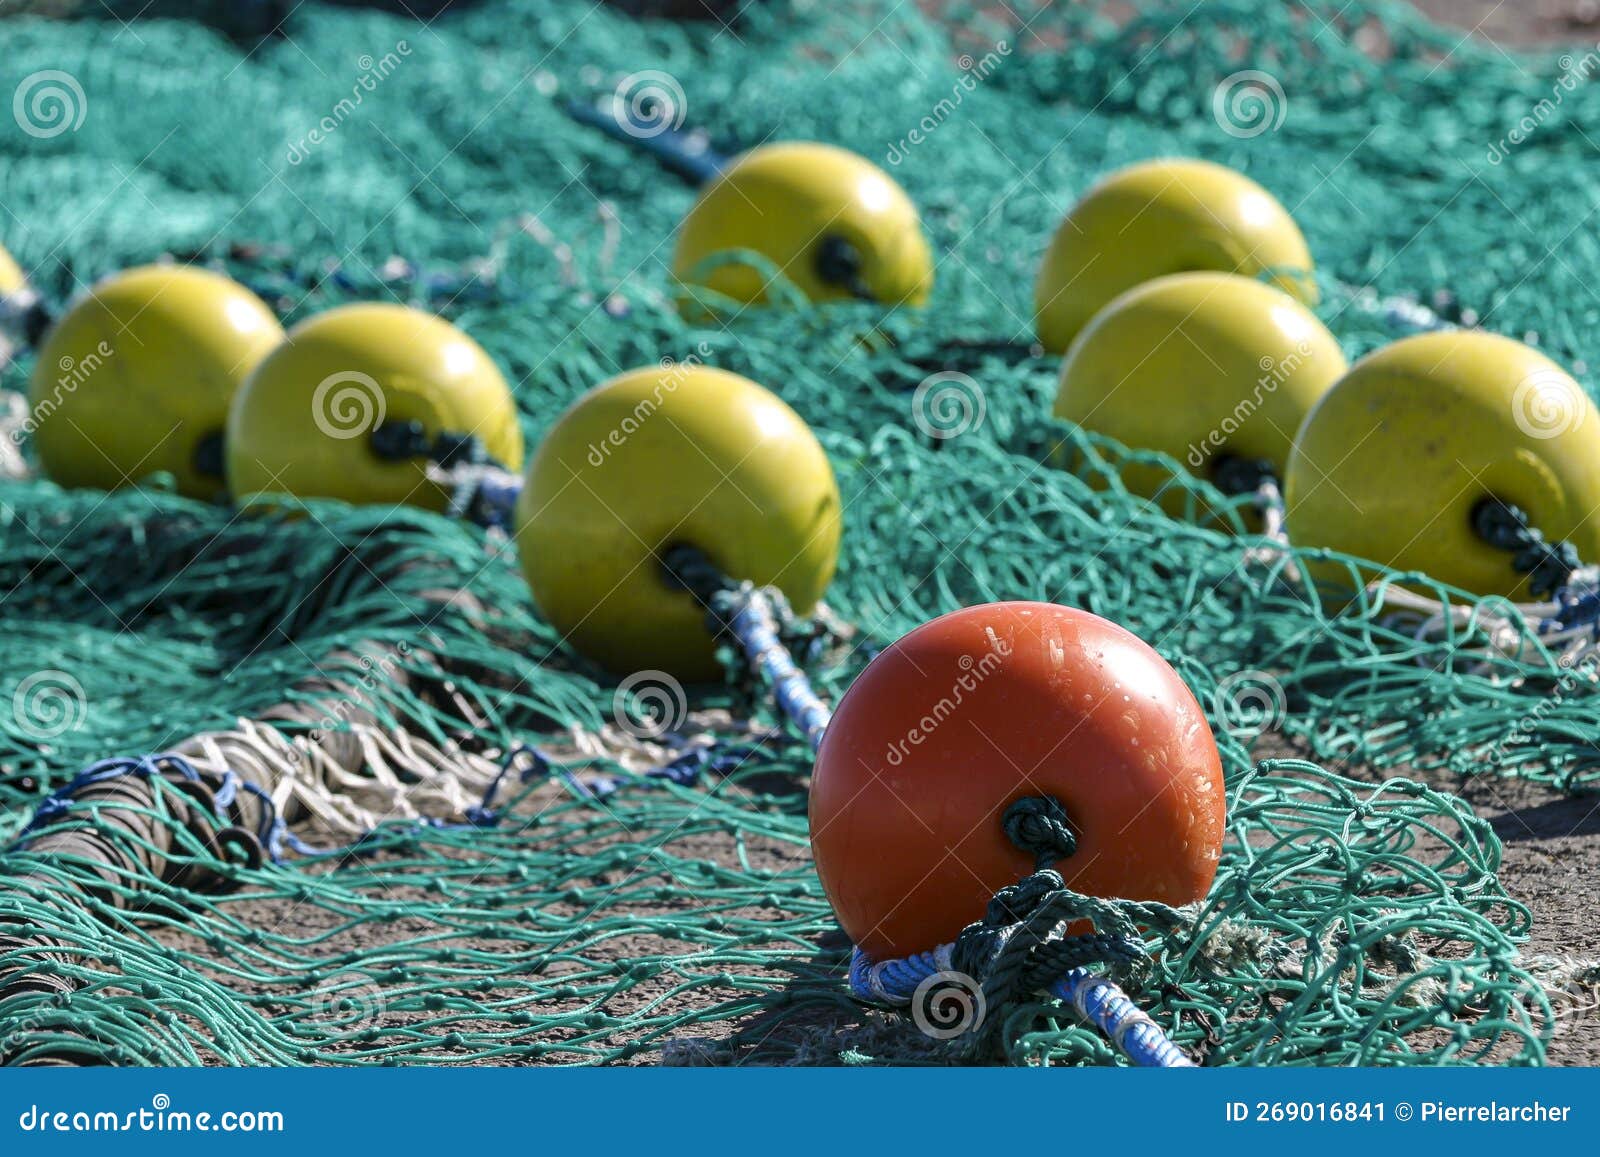 Premium Photo  Colored fishing nets lie on the pier against the background  of boats